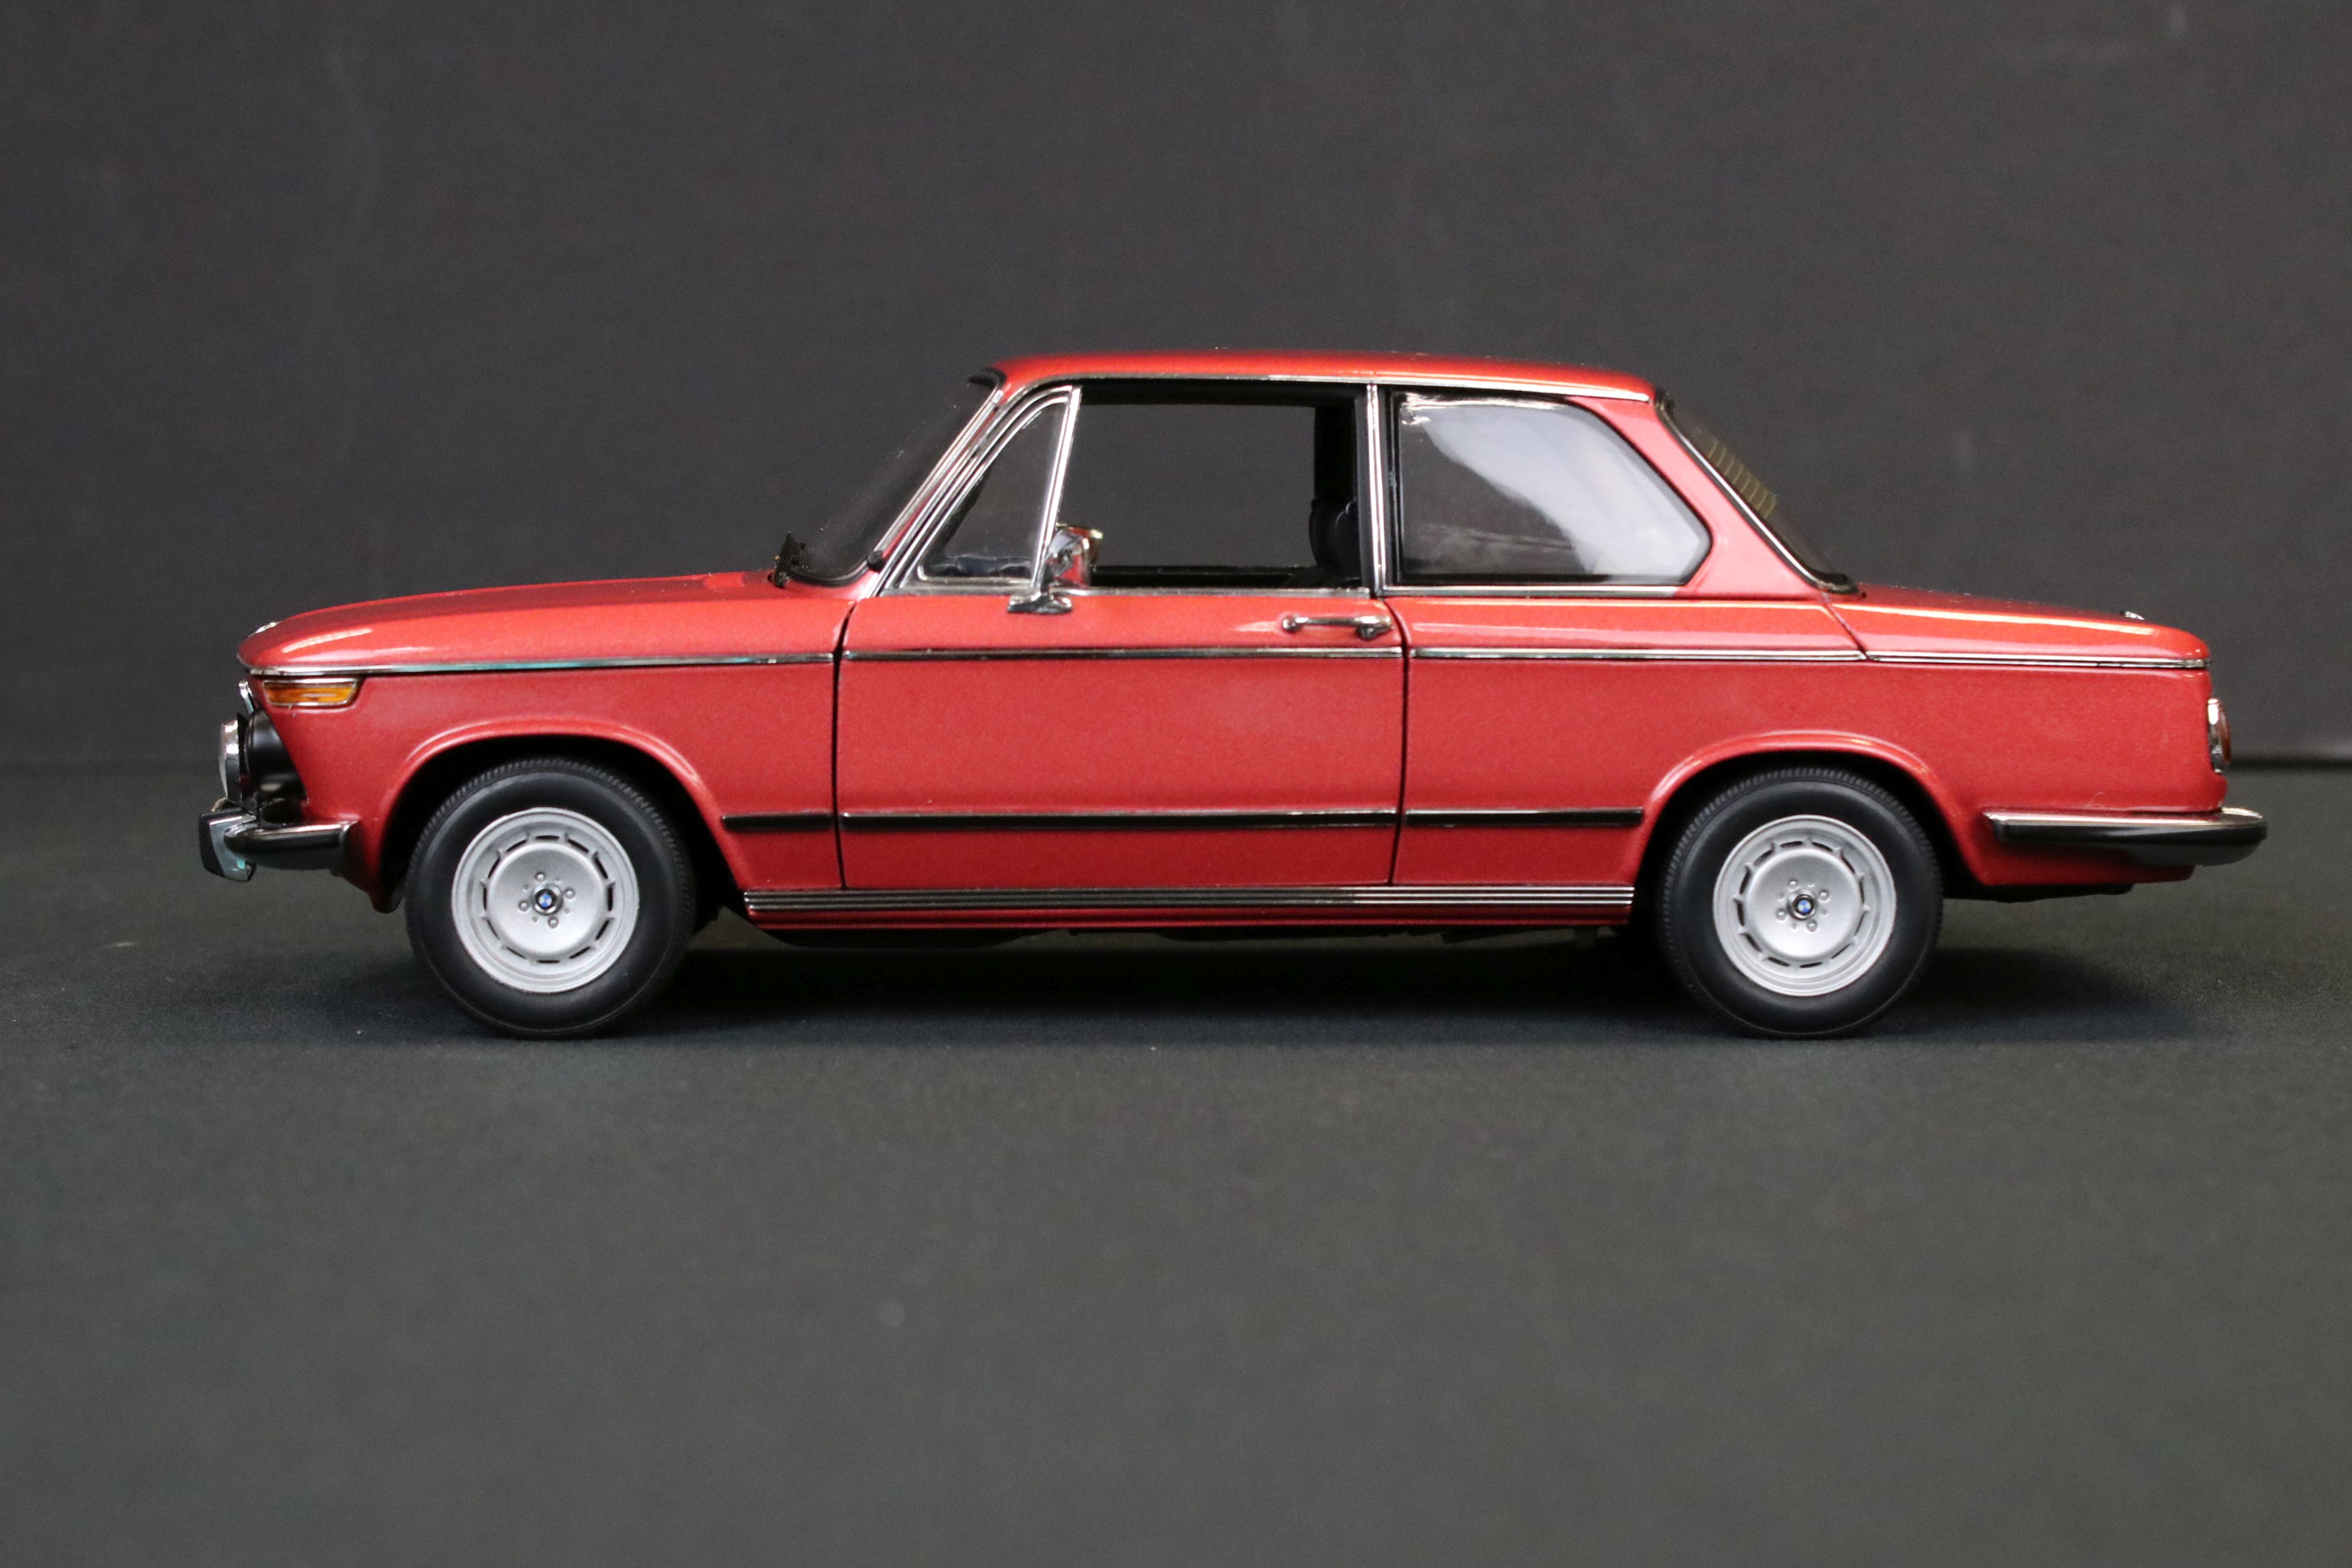 Two boxed AutoArt Millennium 1/18 diecast models to include BMW 2002 L and Lancia Fulvia 1.6HF - Image 6 of 14